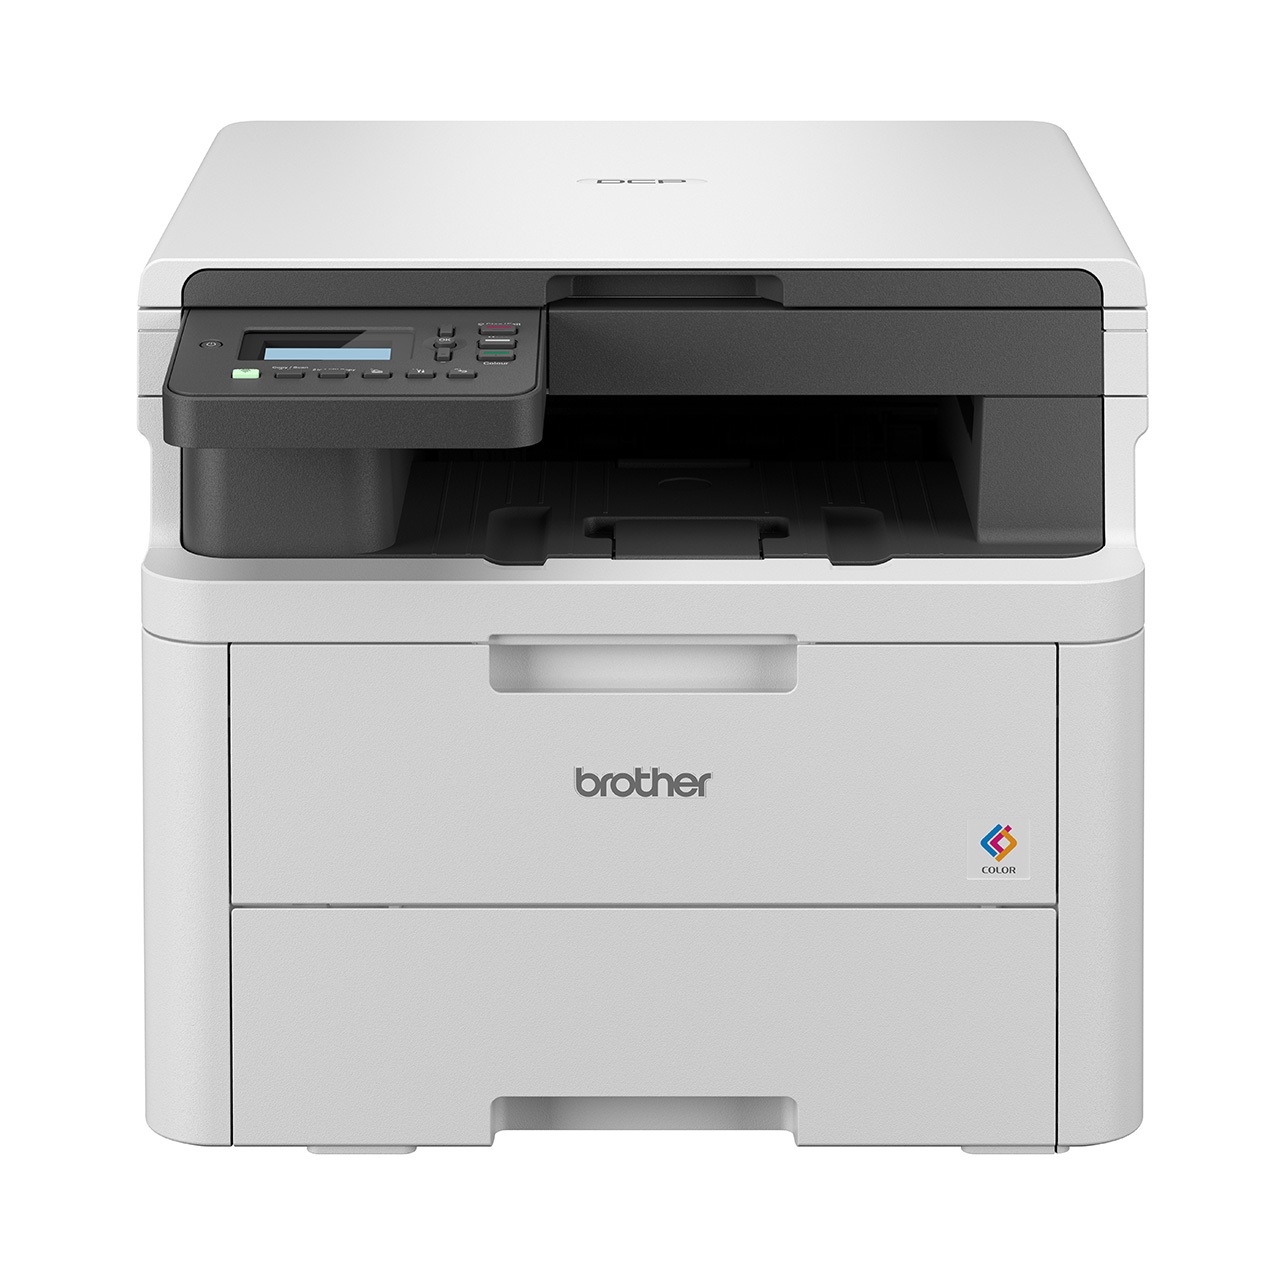 Image of Brother DCP-L3520CDW DCPL3520CDWYJ1 multifunctional laser RO ID 502859